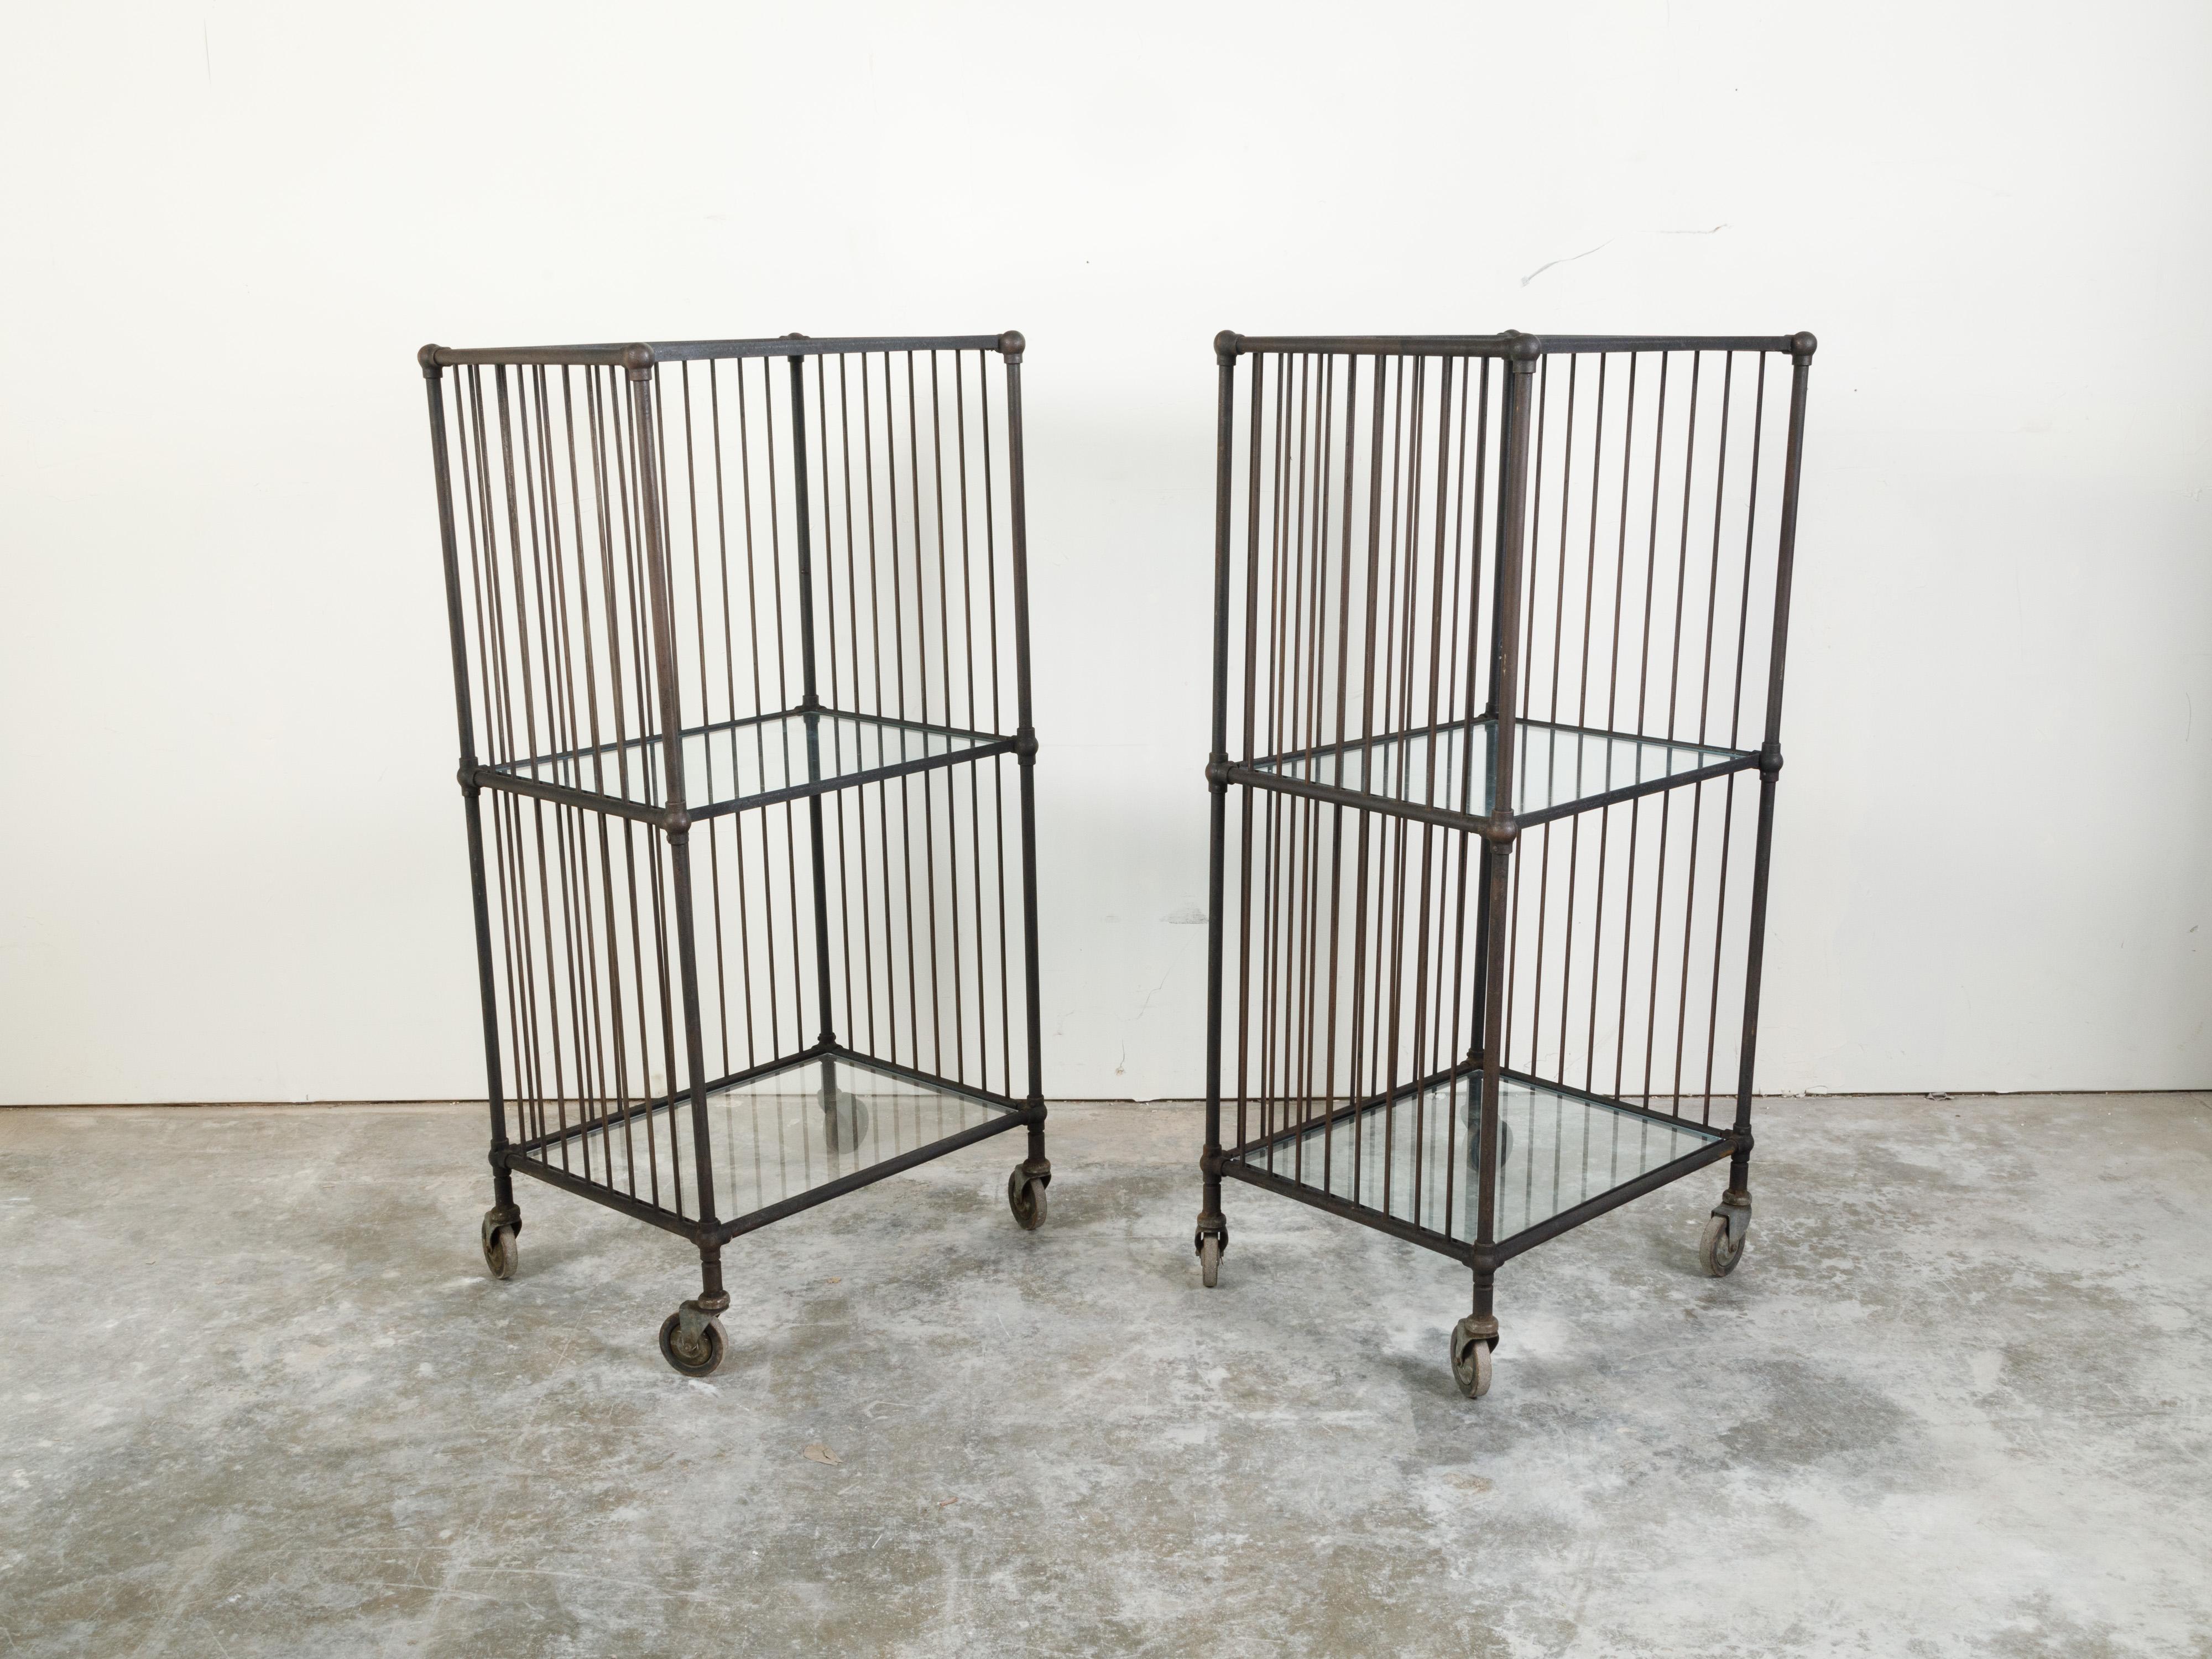 Vintage Industrial Carts with Glass Shelves and Casters, Sold Individually For Sale 1